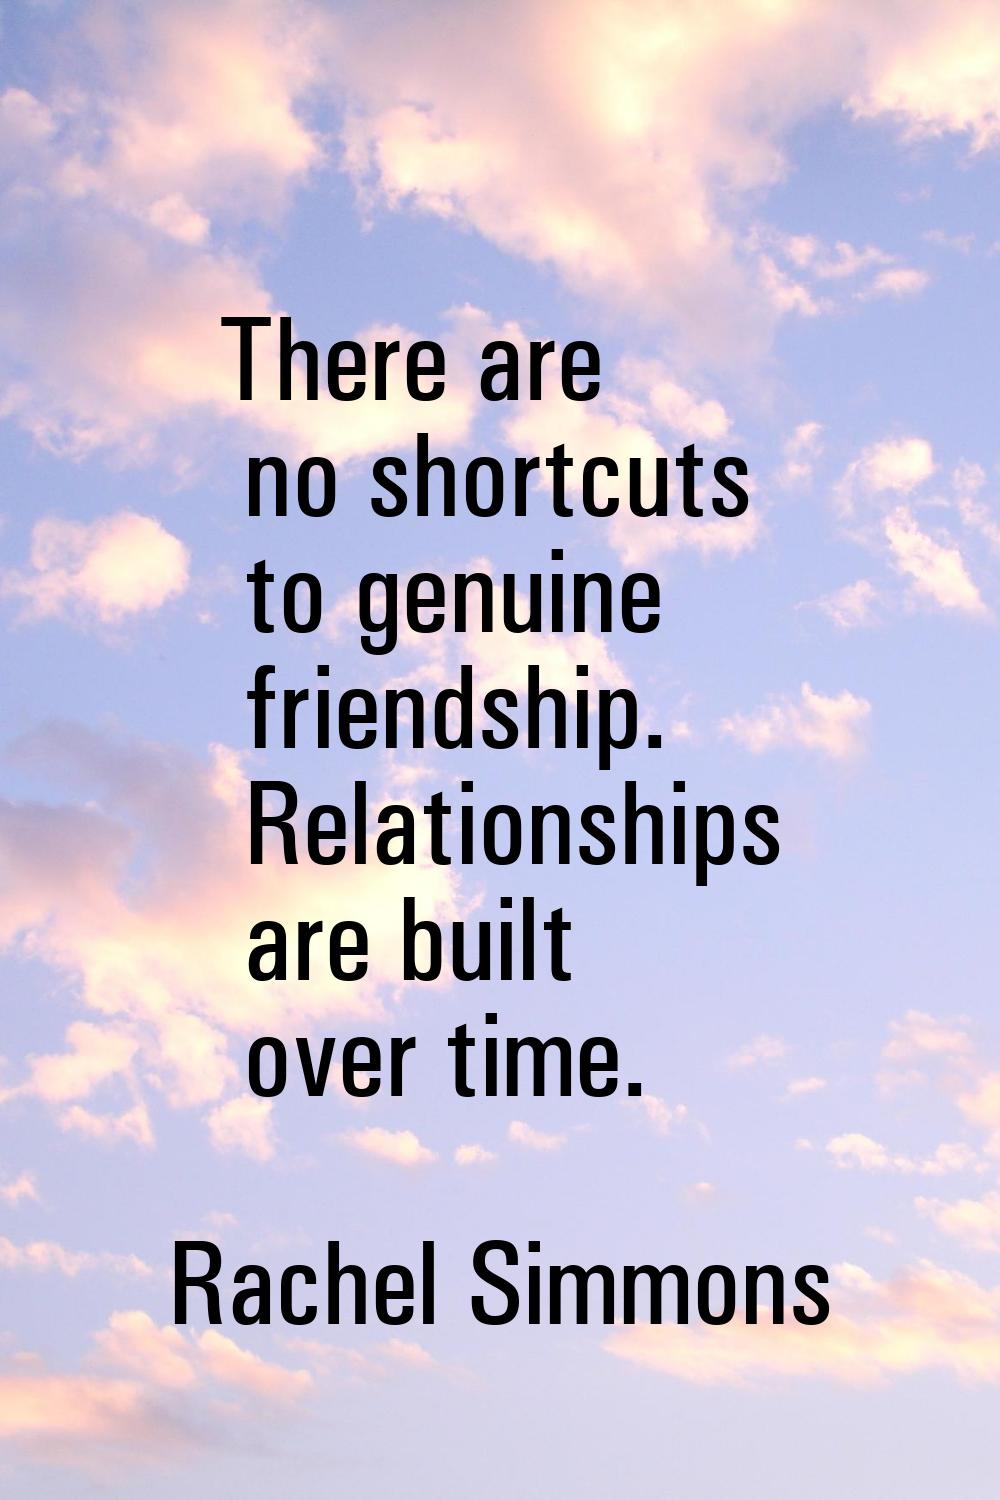 There are no shortcuts to genuine friendship. Relationships are built over time.